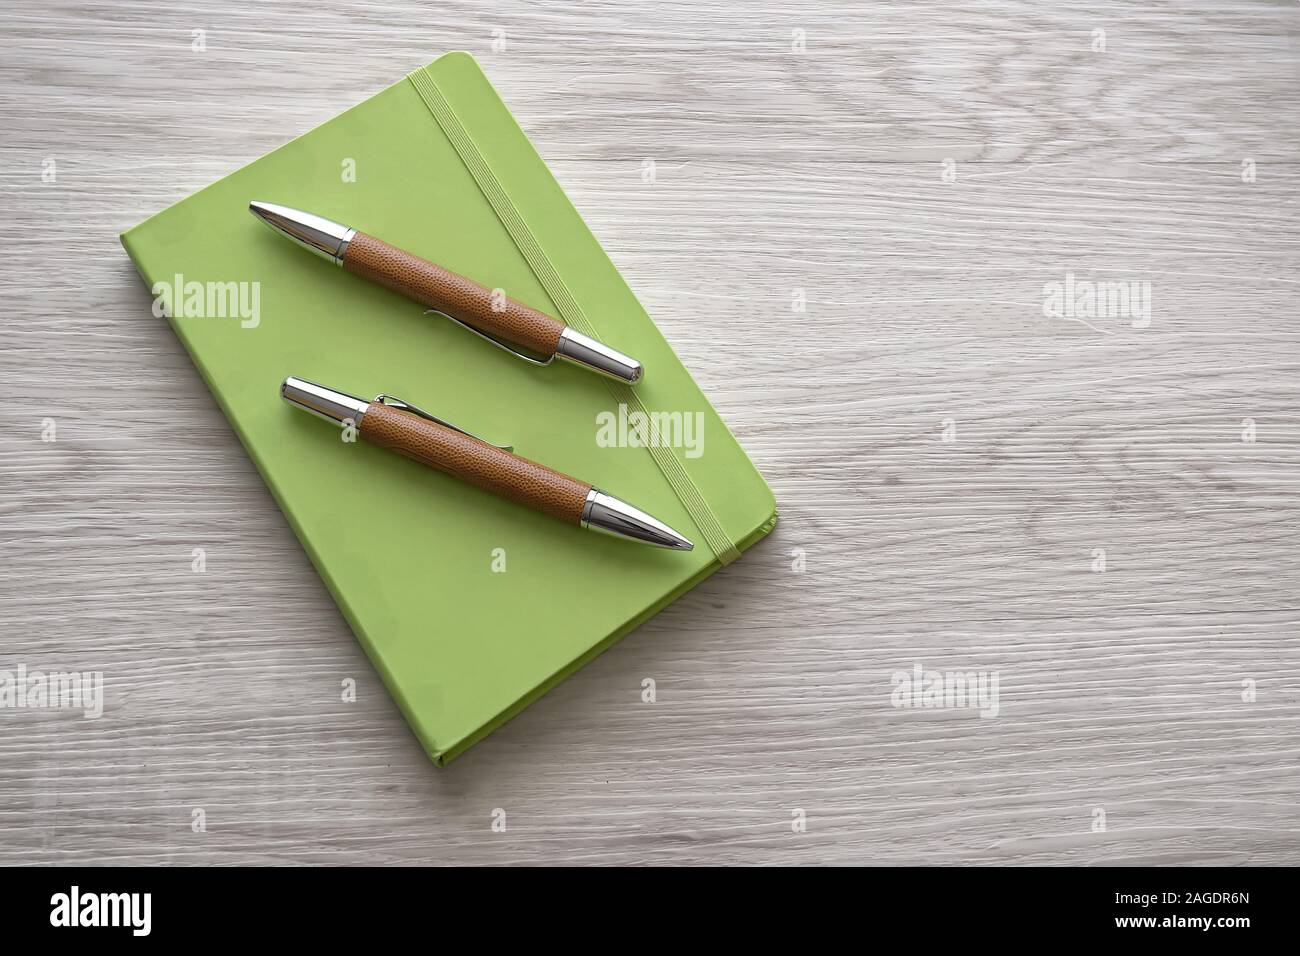 High angle shot of two pens on a green notebook on a wooden surface Stock Photo